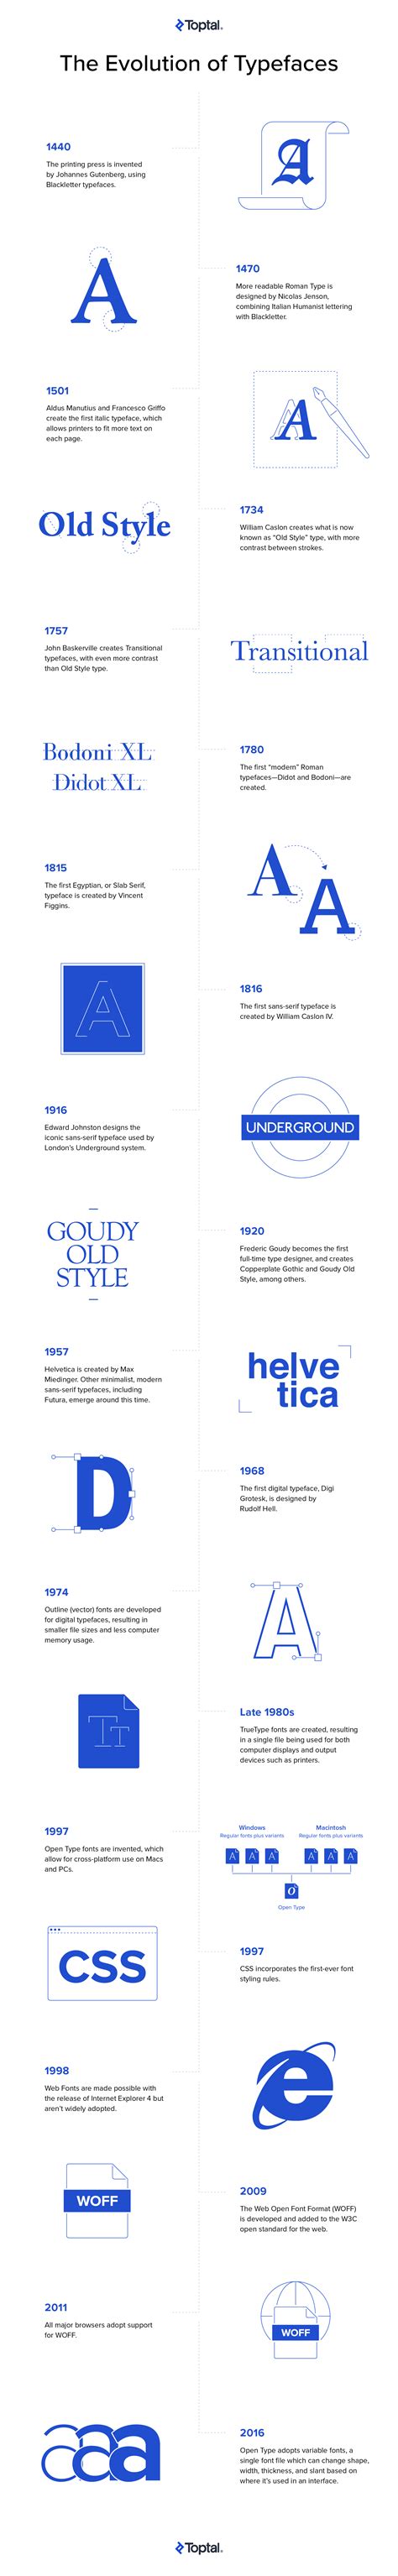 A Typeface History With Infographic Toptal®